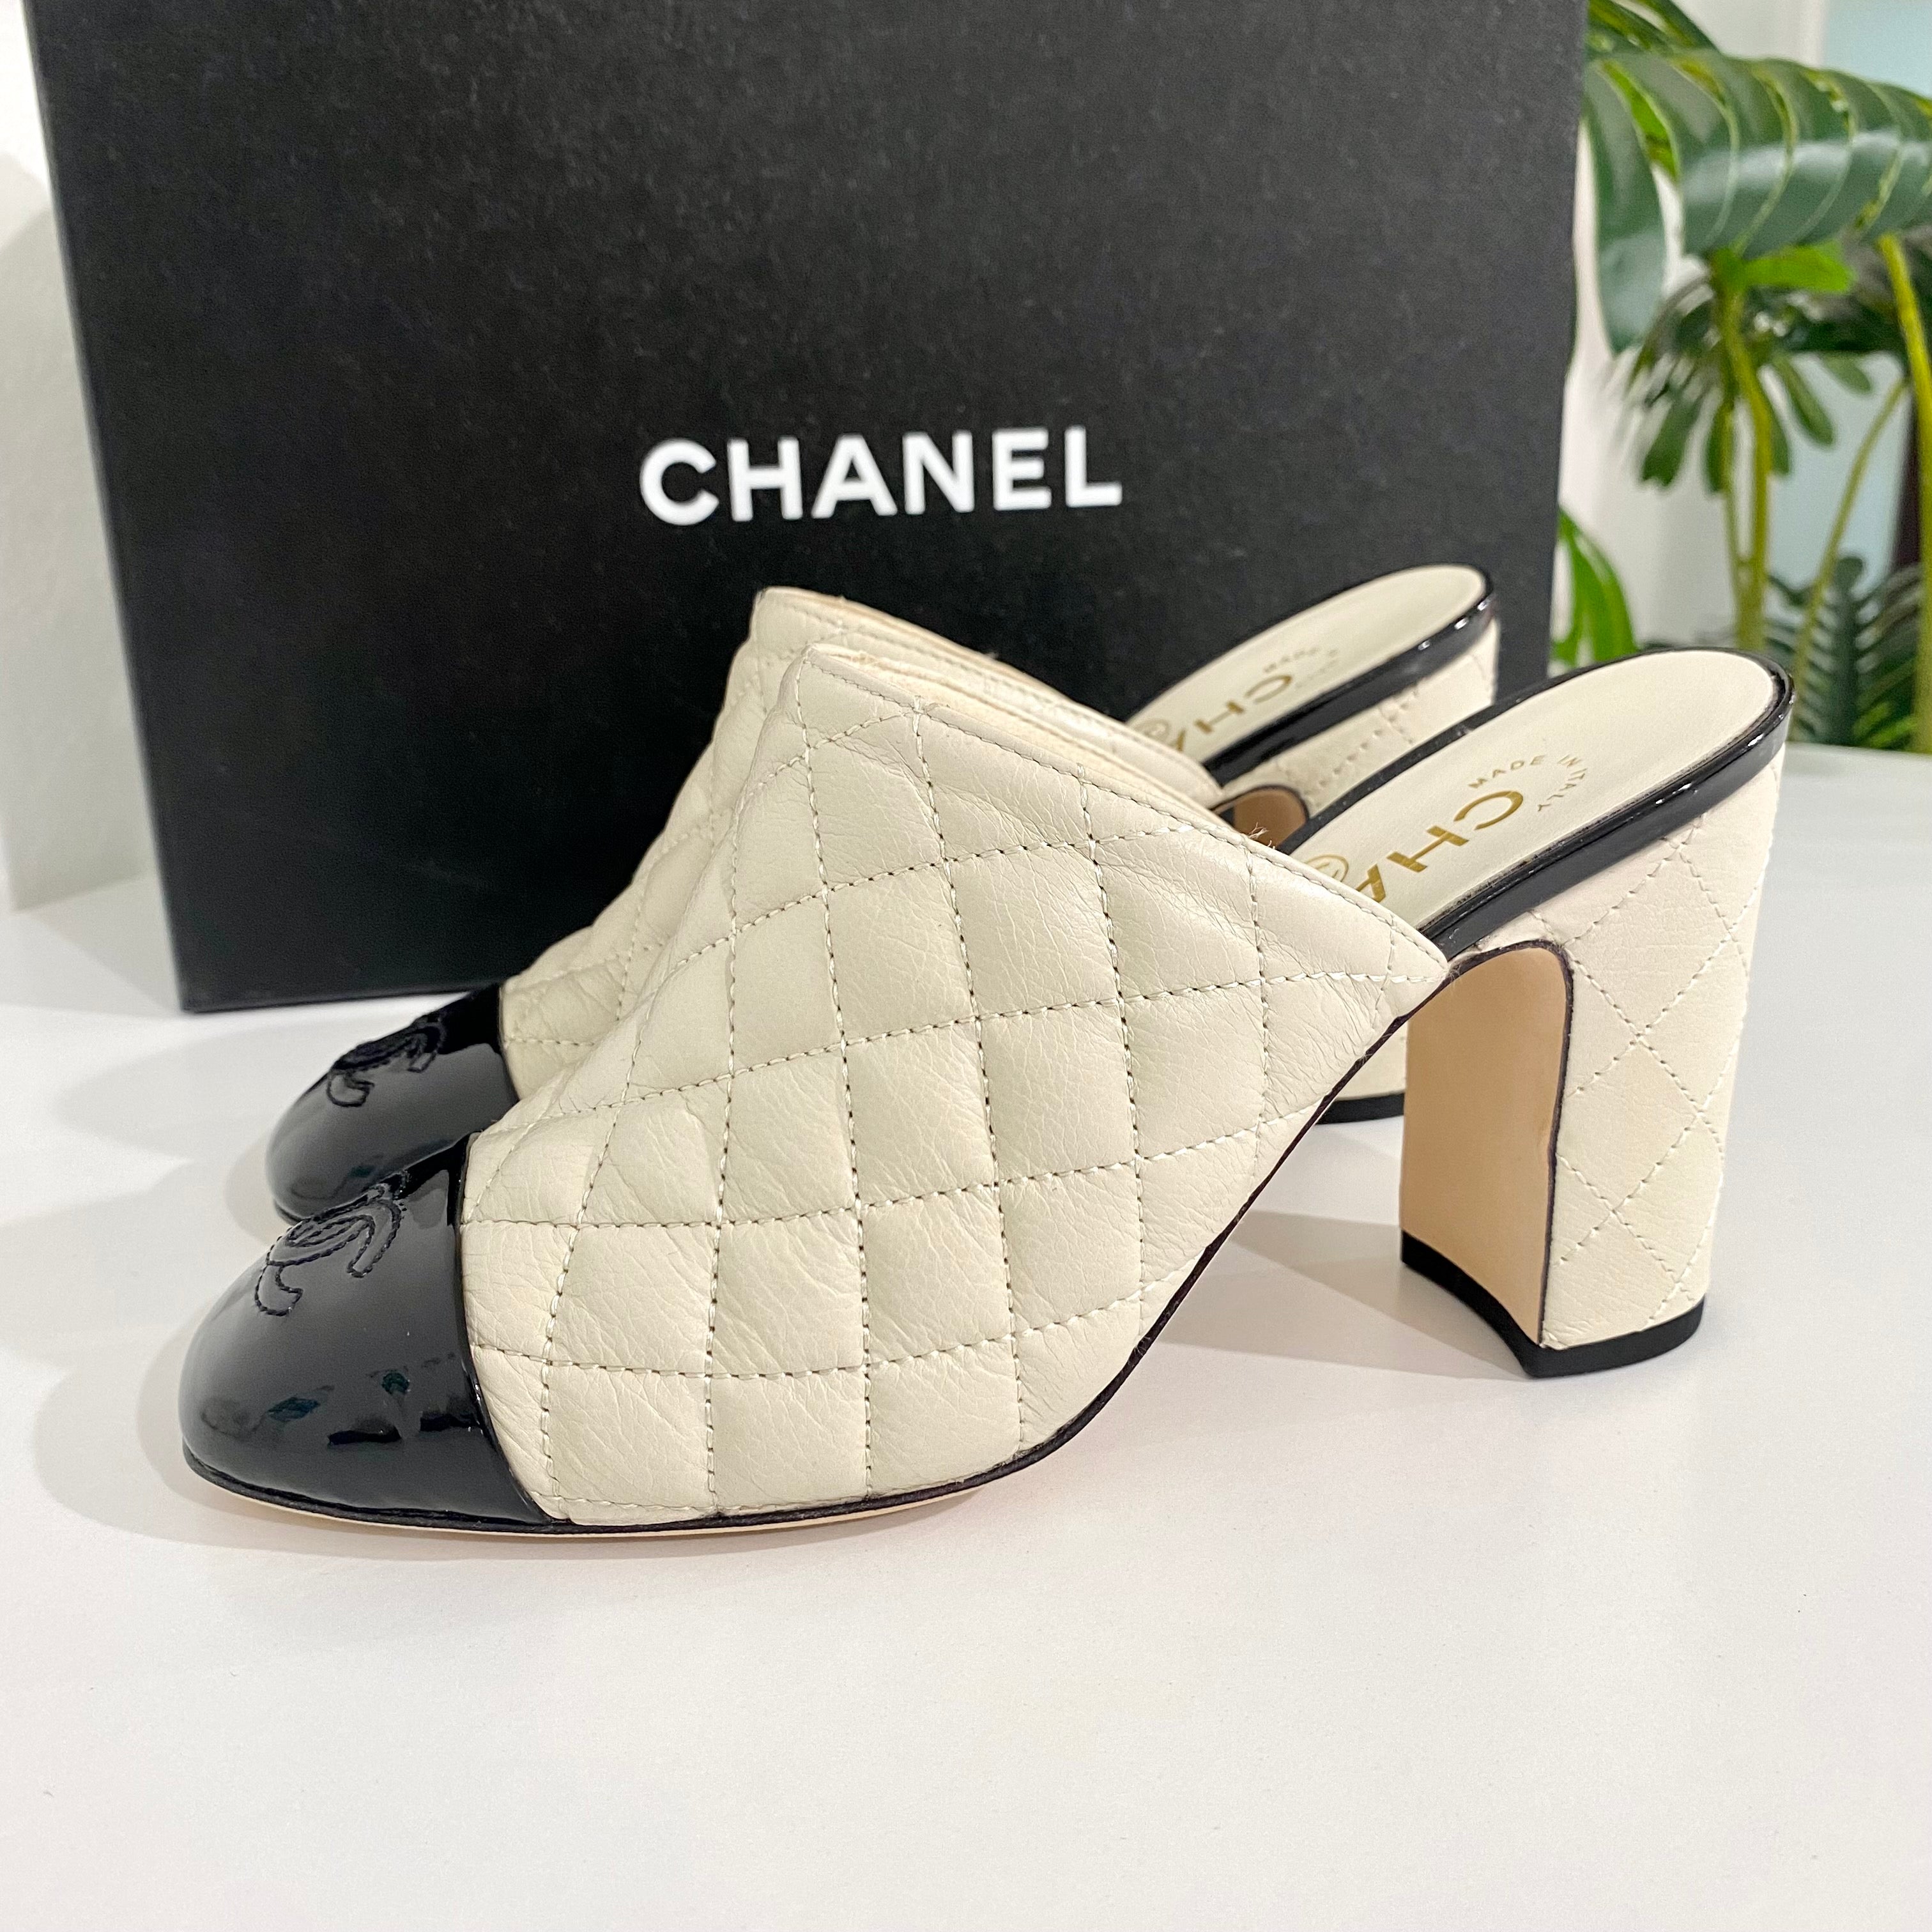 Chanel Quilted Turnlock Mules*